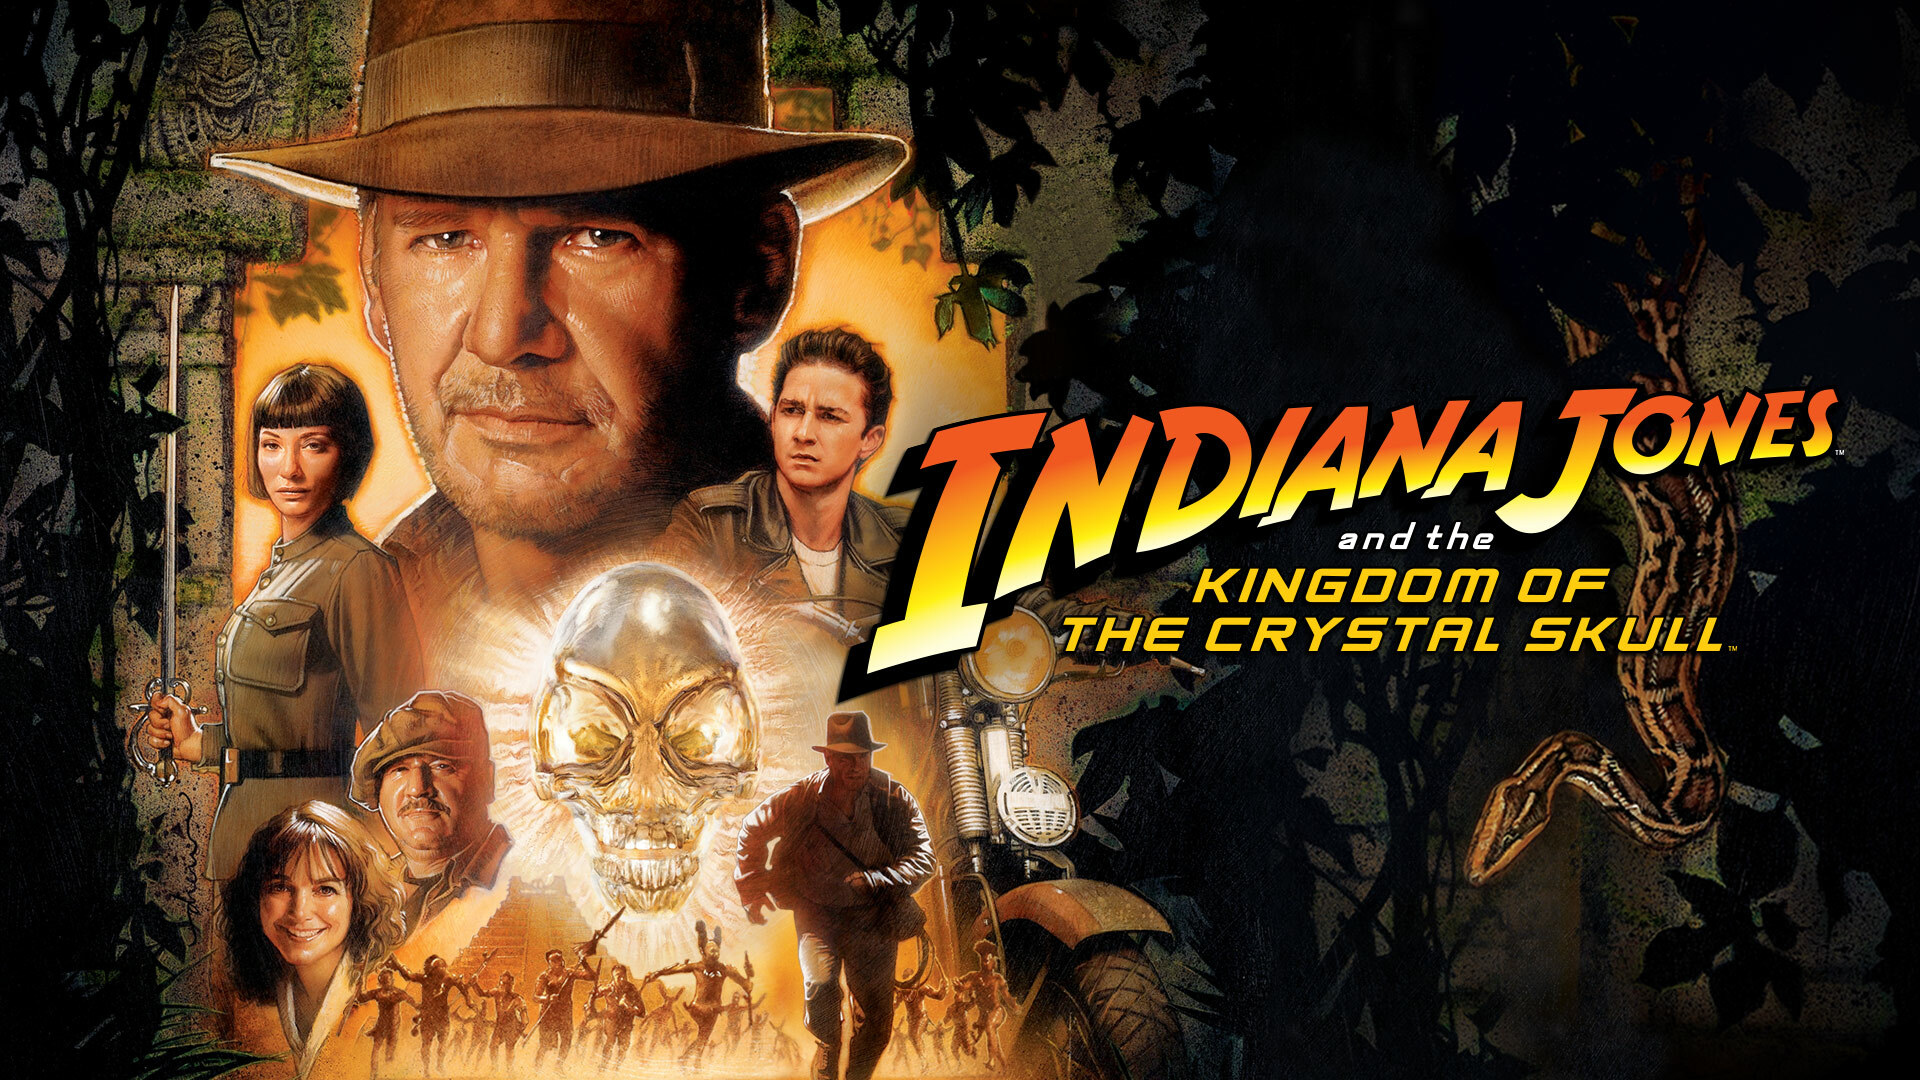 Indiana Jones and the Kingdom of the Crystal Skull - Movie Poster 60x160cm  - Paramount Pictures 2008